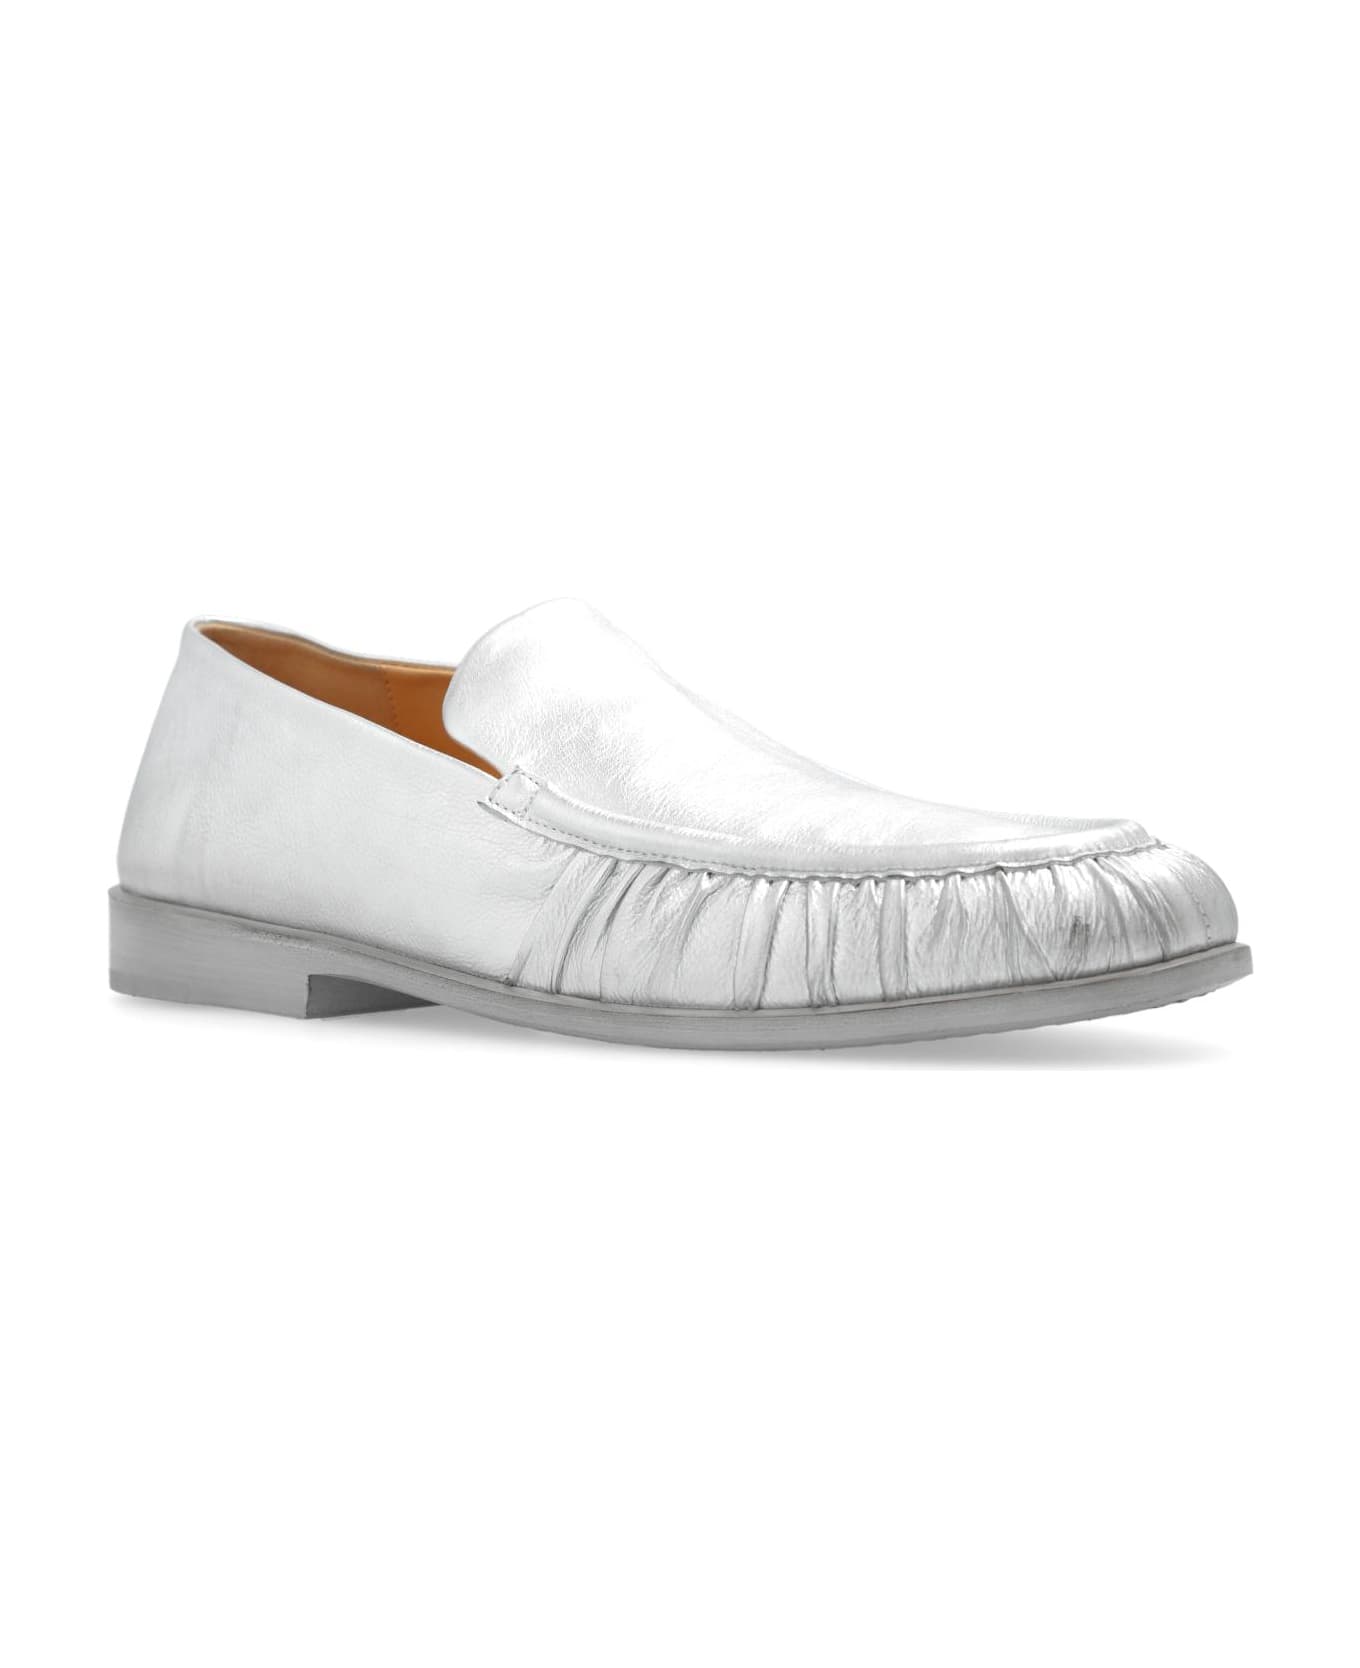 Marsell 'mocassino' Loafers - Silver